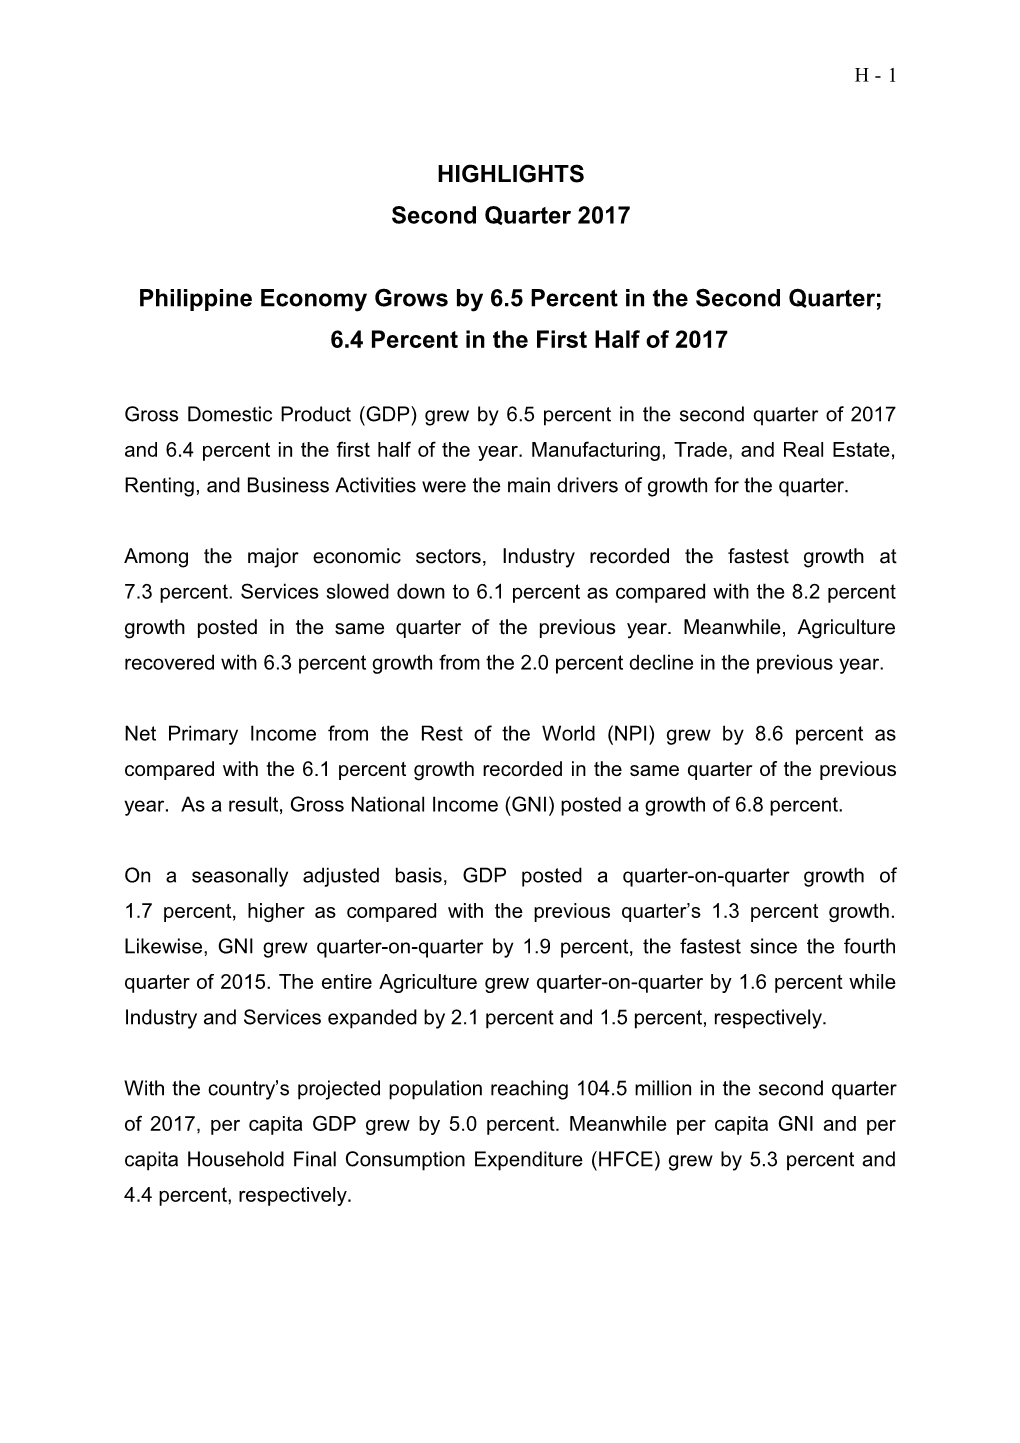 Philippine Economy Grows by 6.5 Percent in the Second Quarter; 6.4 Percent in the First